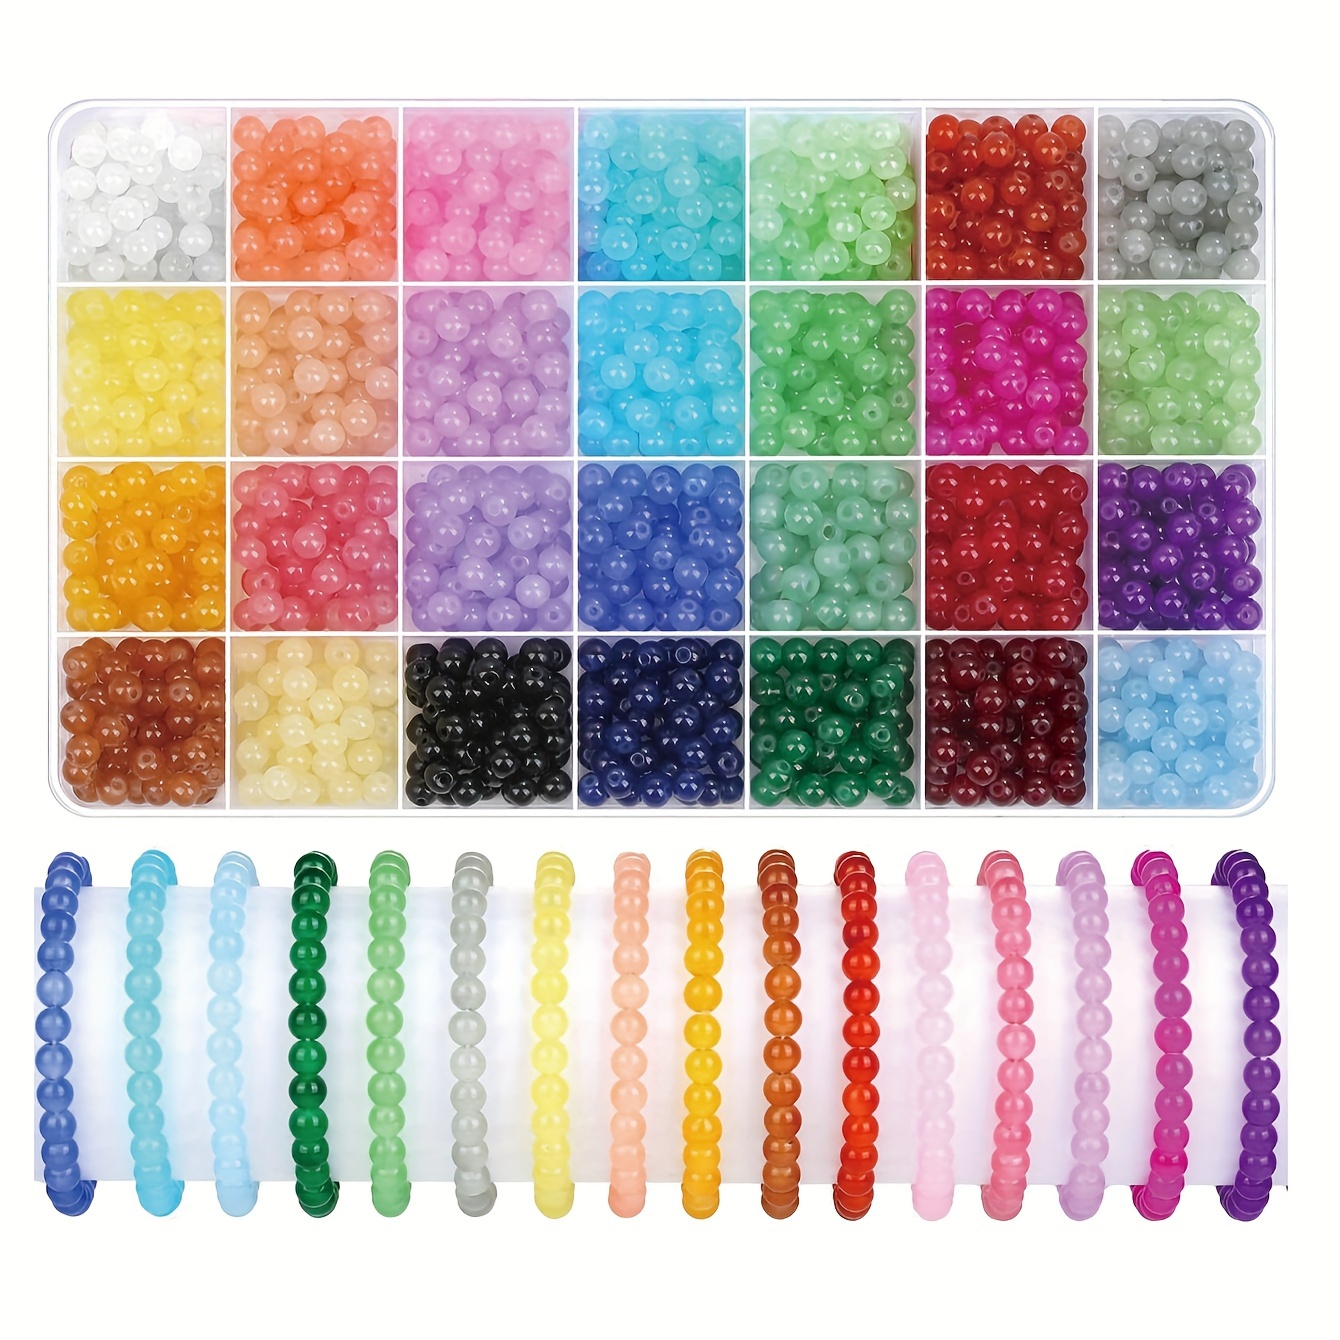 

About 1400pcs 6mm Glass Round Beads, Diy Jewelry Making Accessories